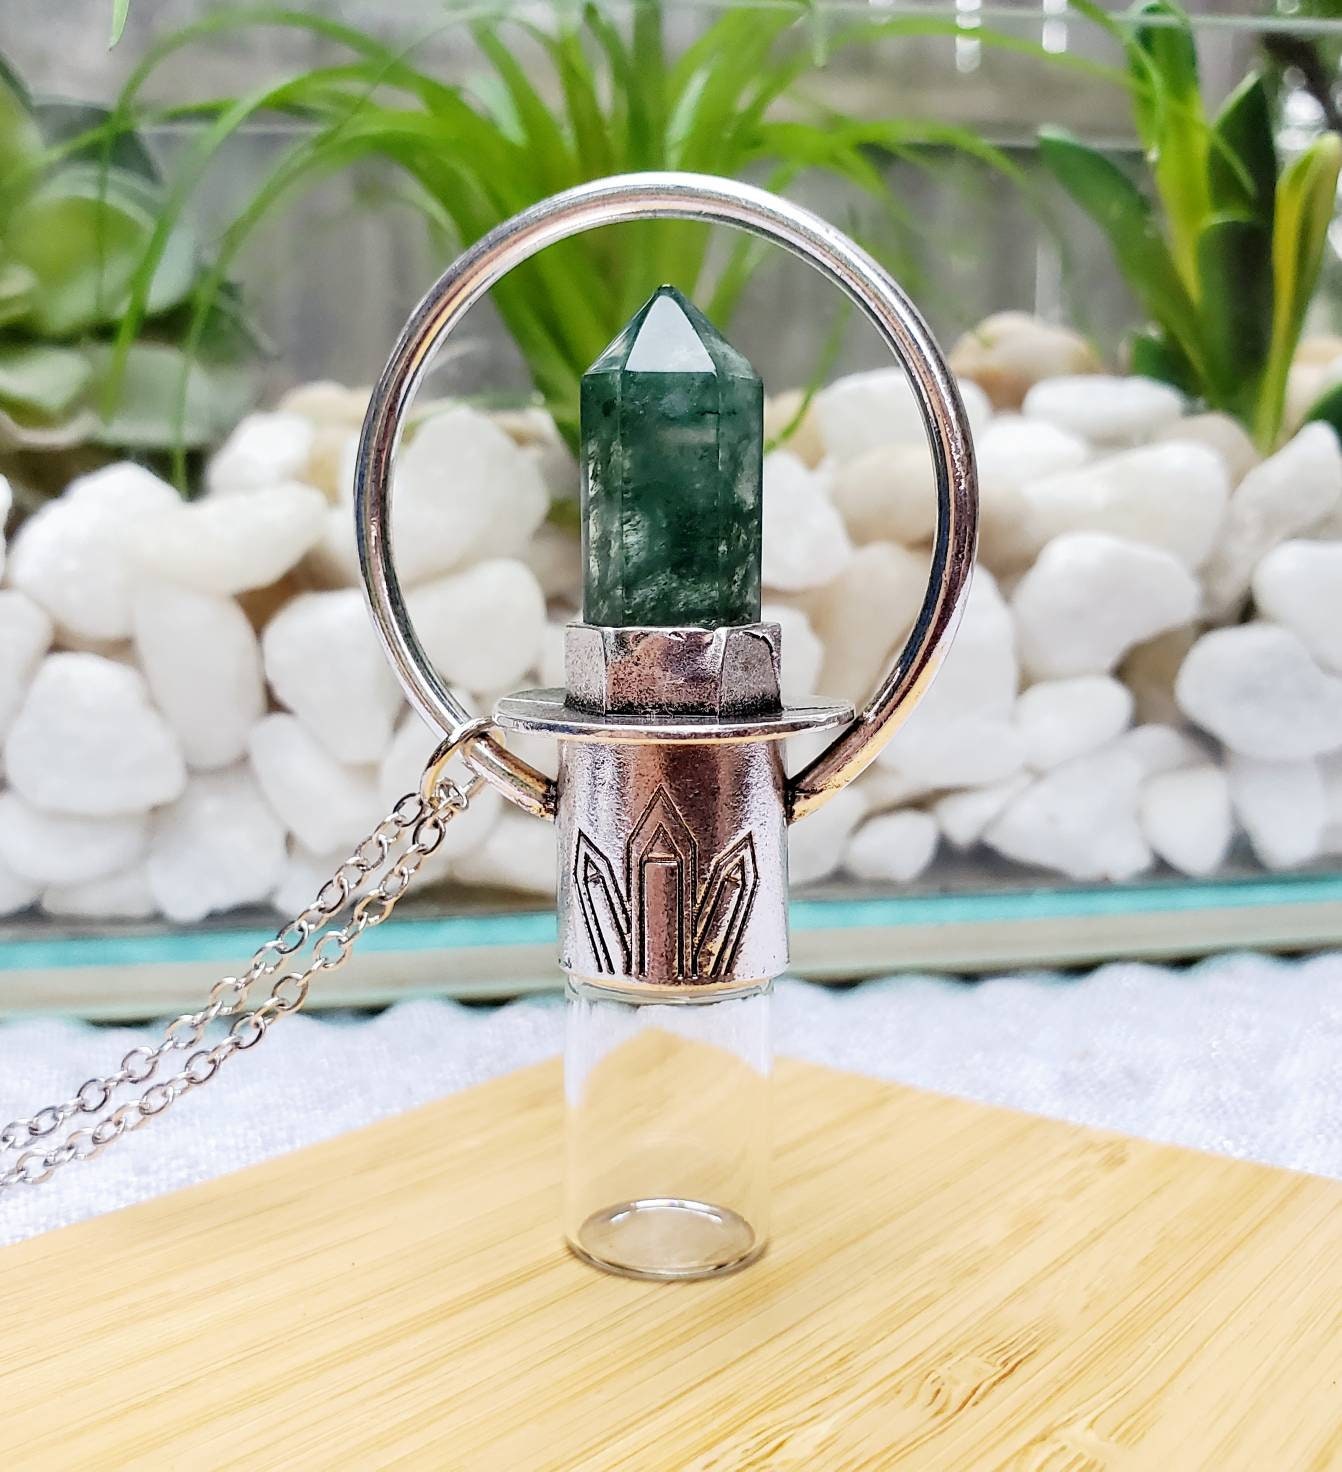 Women Men Essential Oil Diffuser Necklace Stainless Steel Aromatherapy  Pendant | eBay